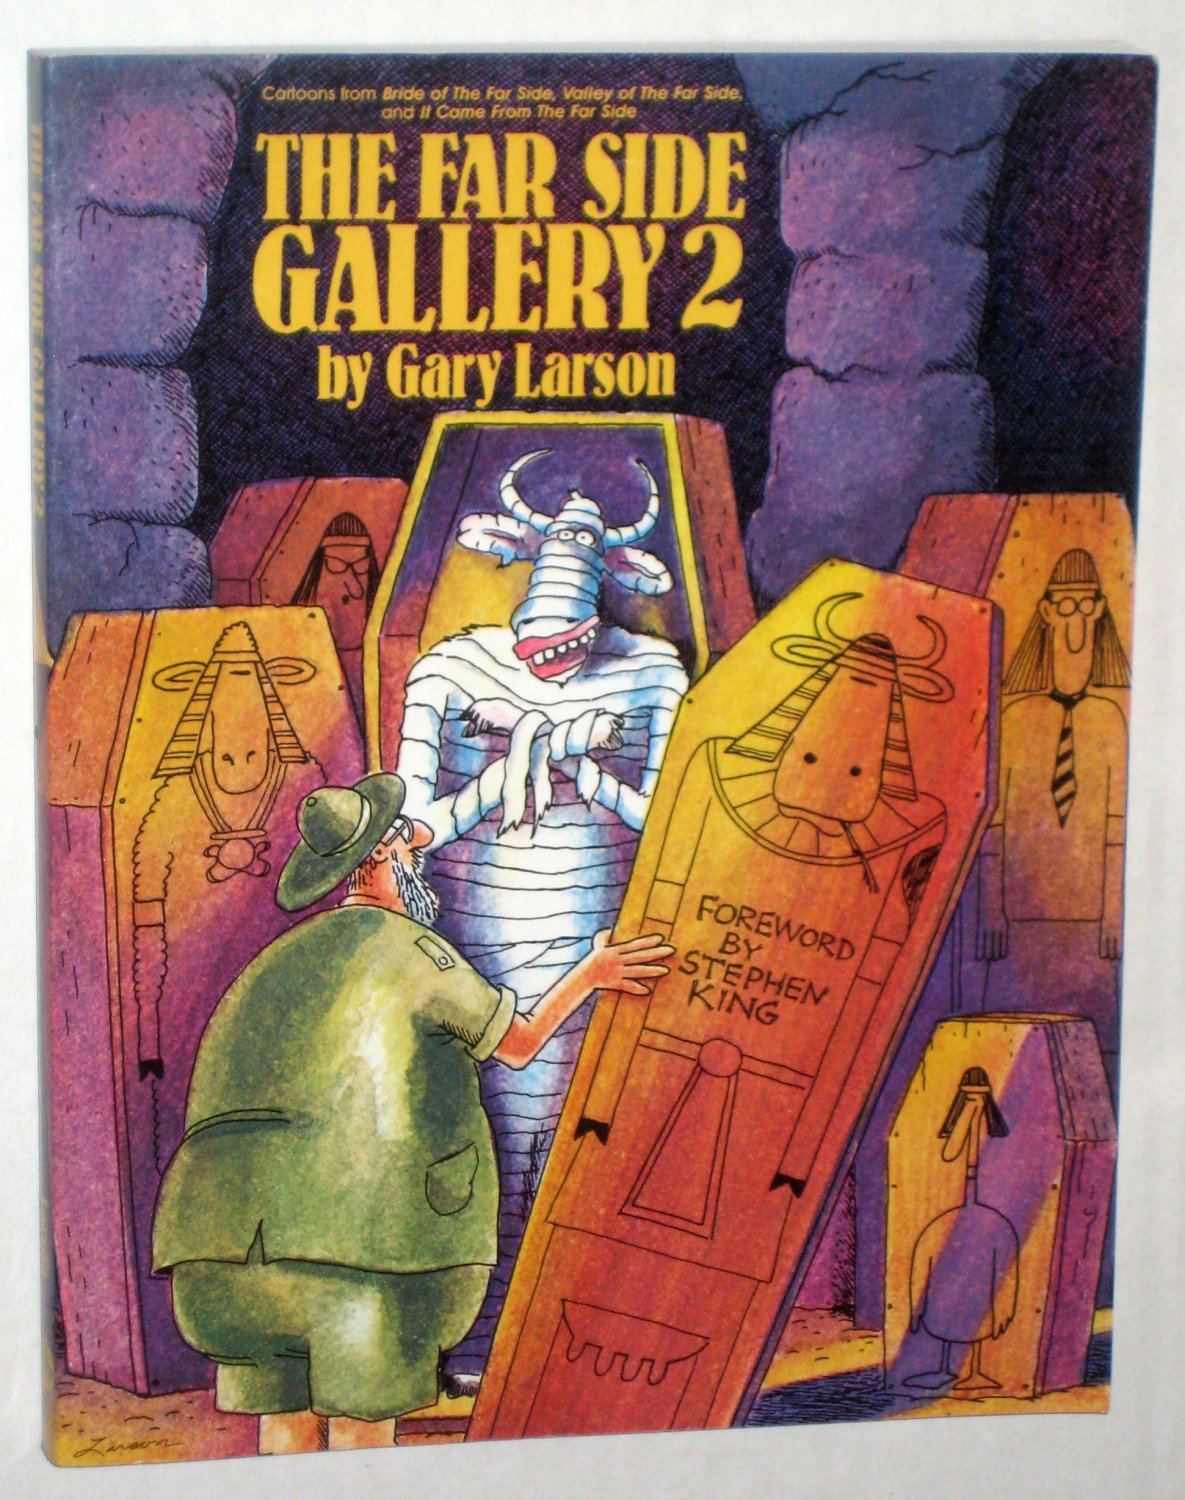 The Far Side Gallery 2 Softcover Paperback Gary Larson Humor Cartoons Comics